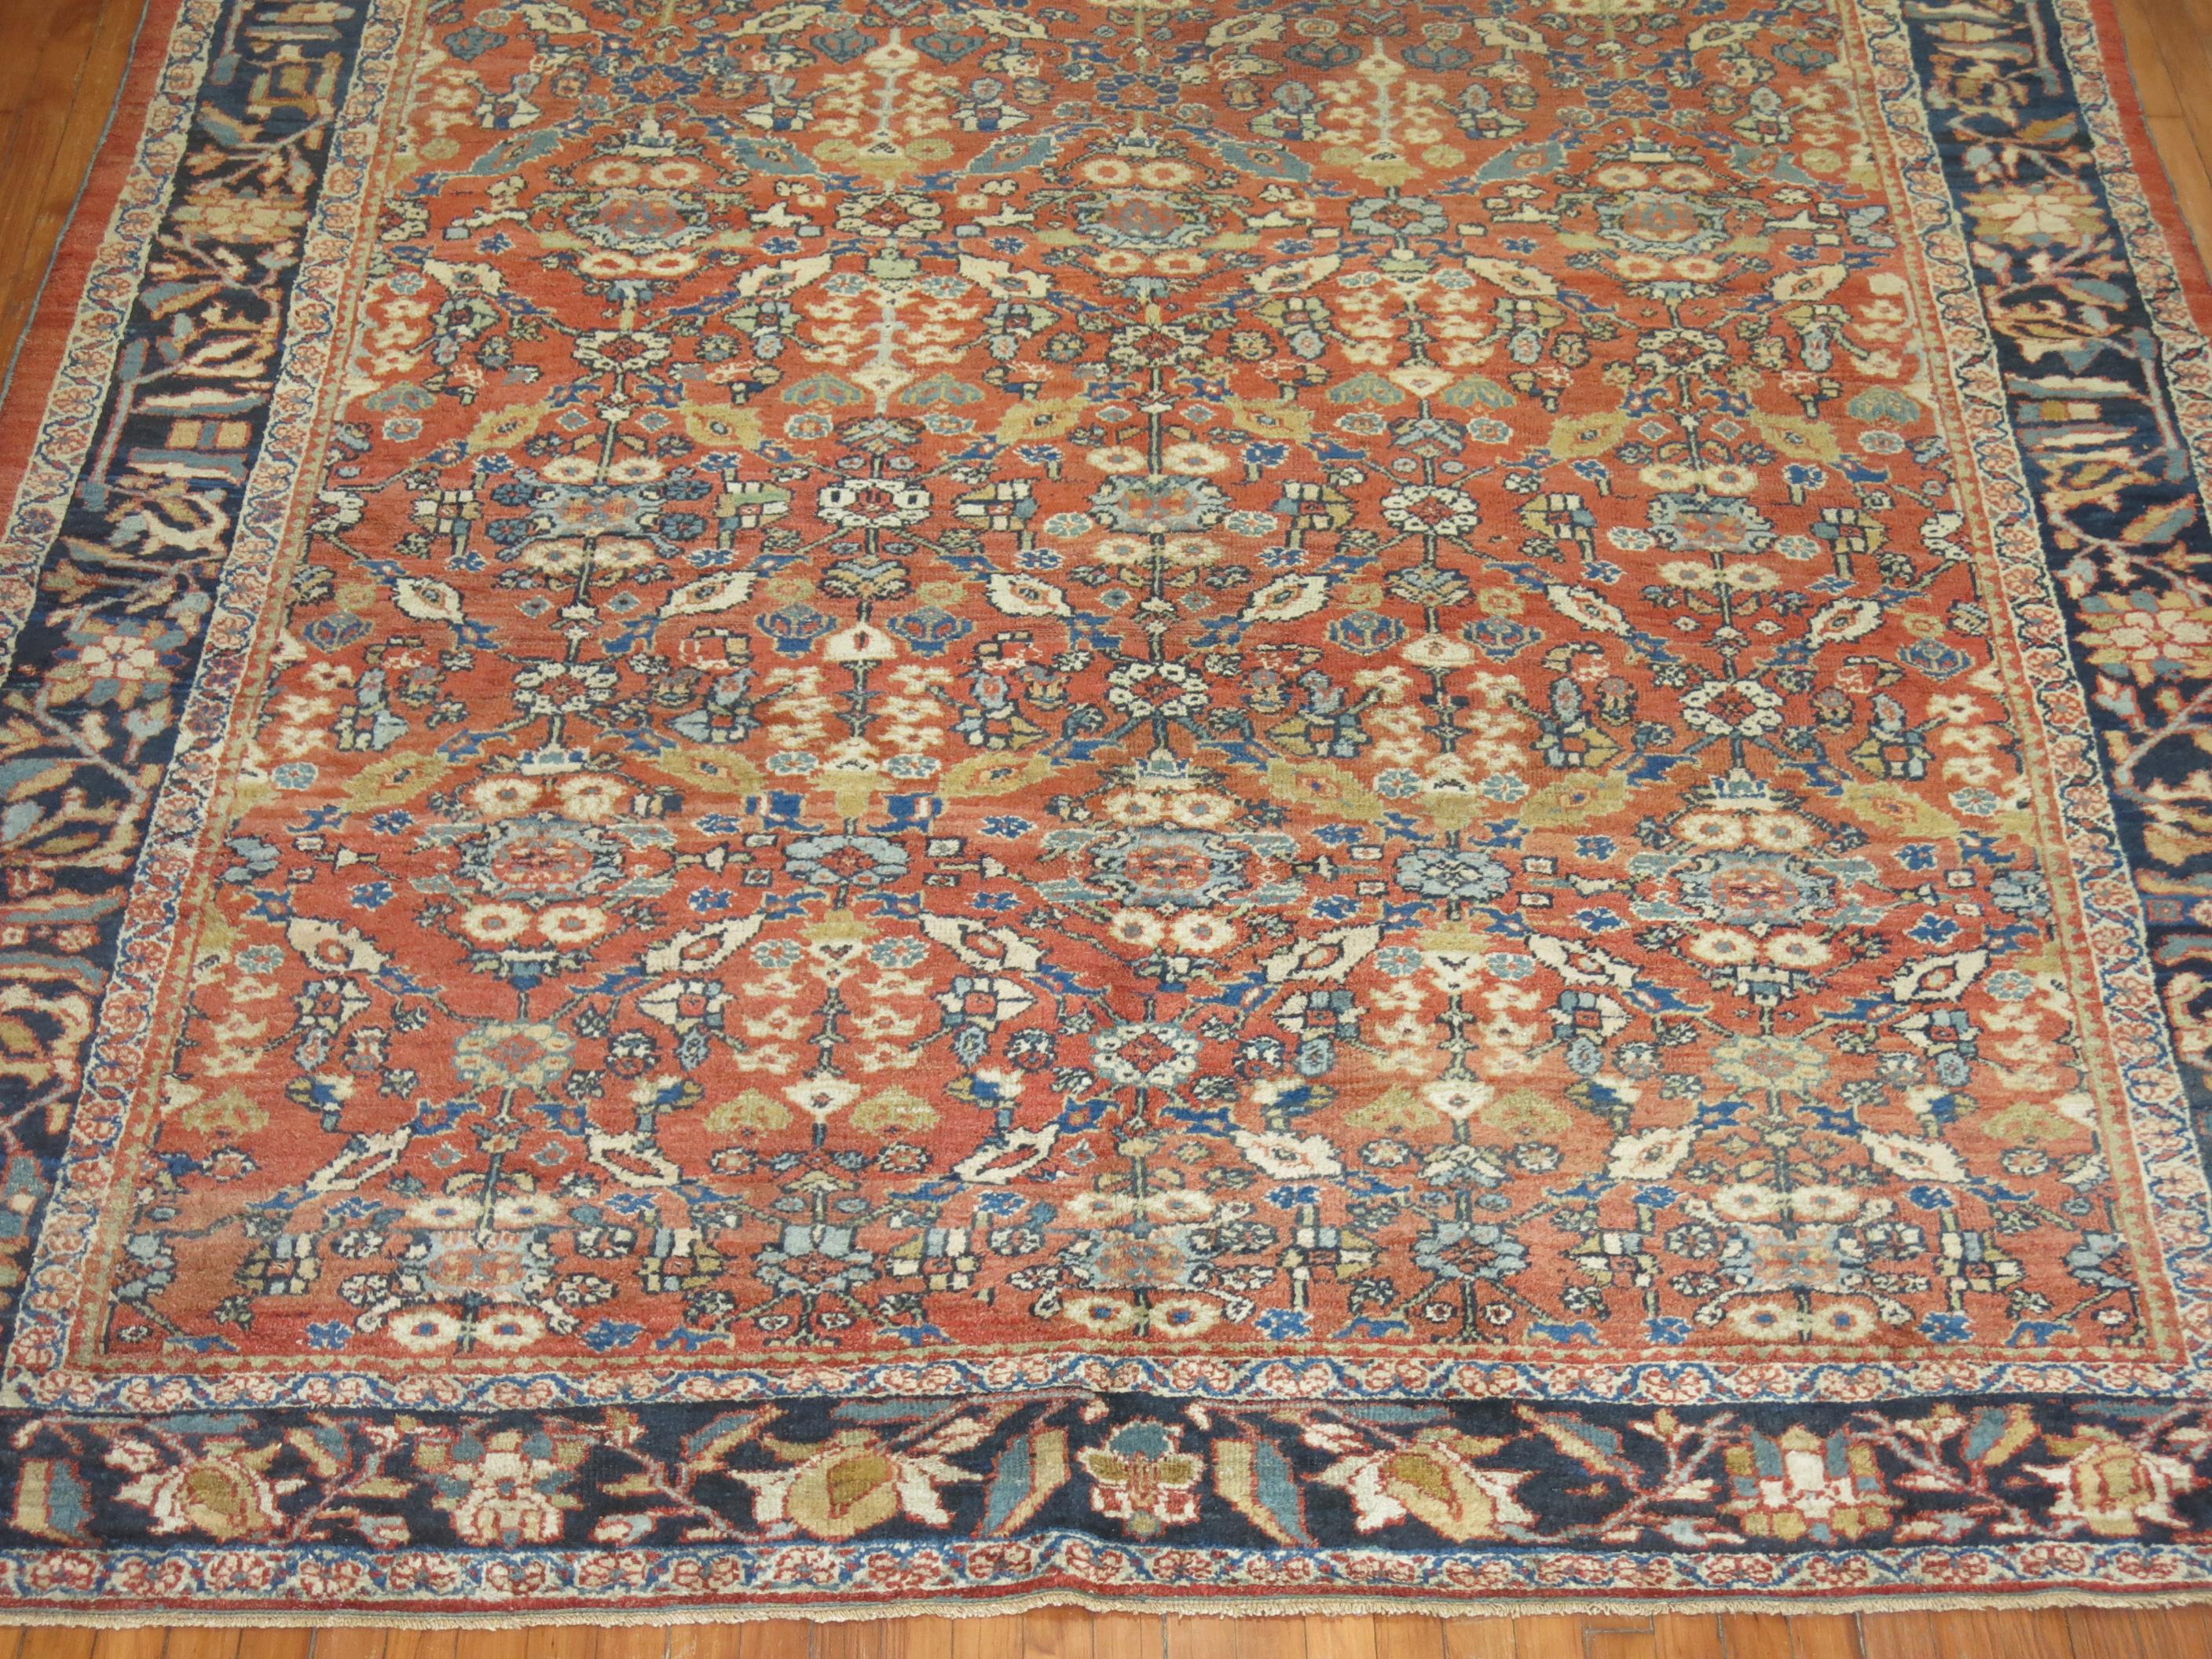 Room size Persian Mahal rug with an all-over motif

Mahal Persian carpets from the 19th century and turn of the 20th century have become one of the most desirable among Persian village weaving's, as they appeal strongly to both connoisseurs and